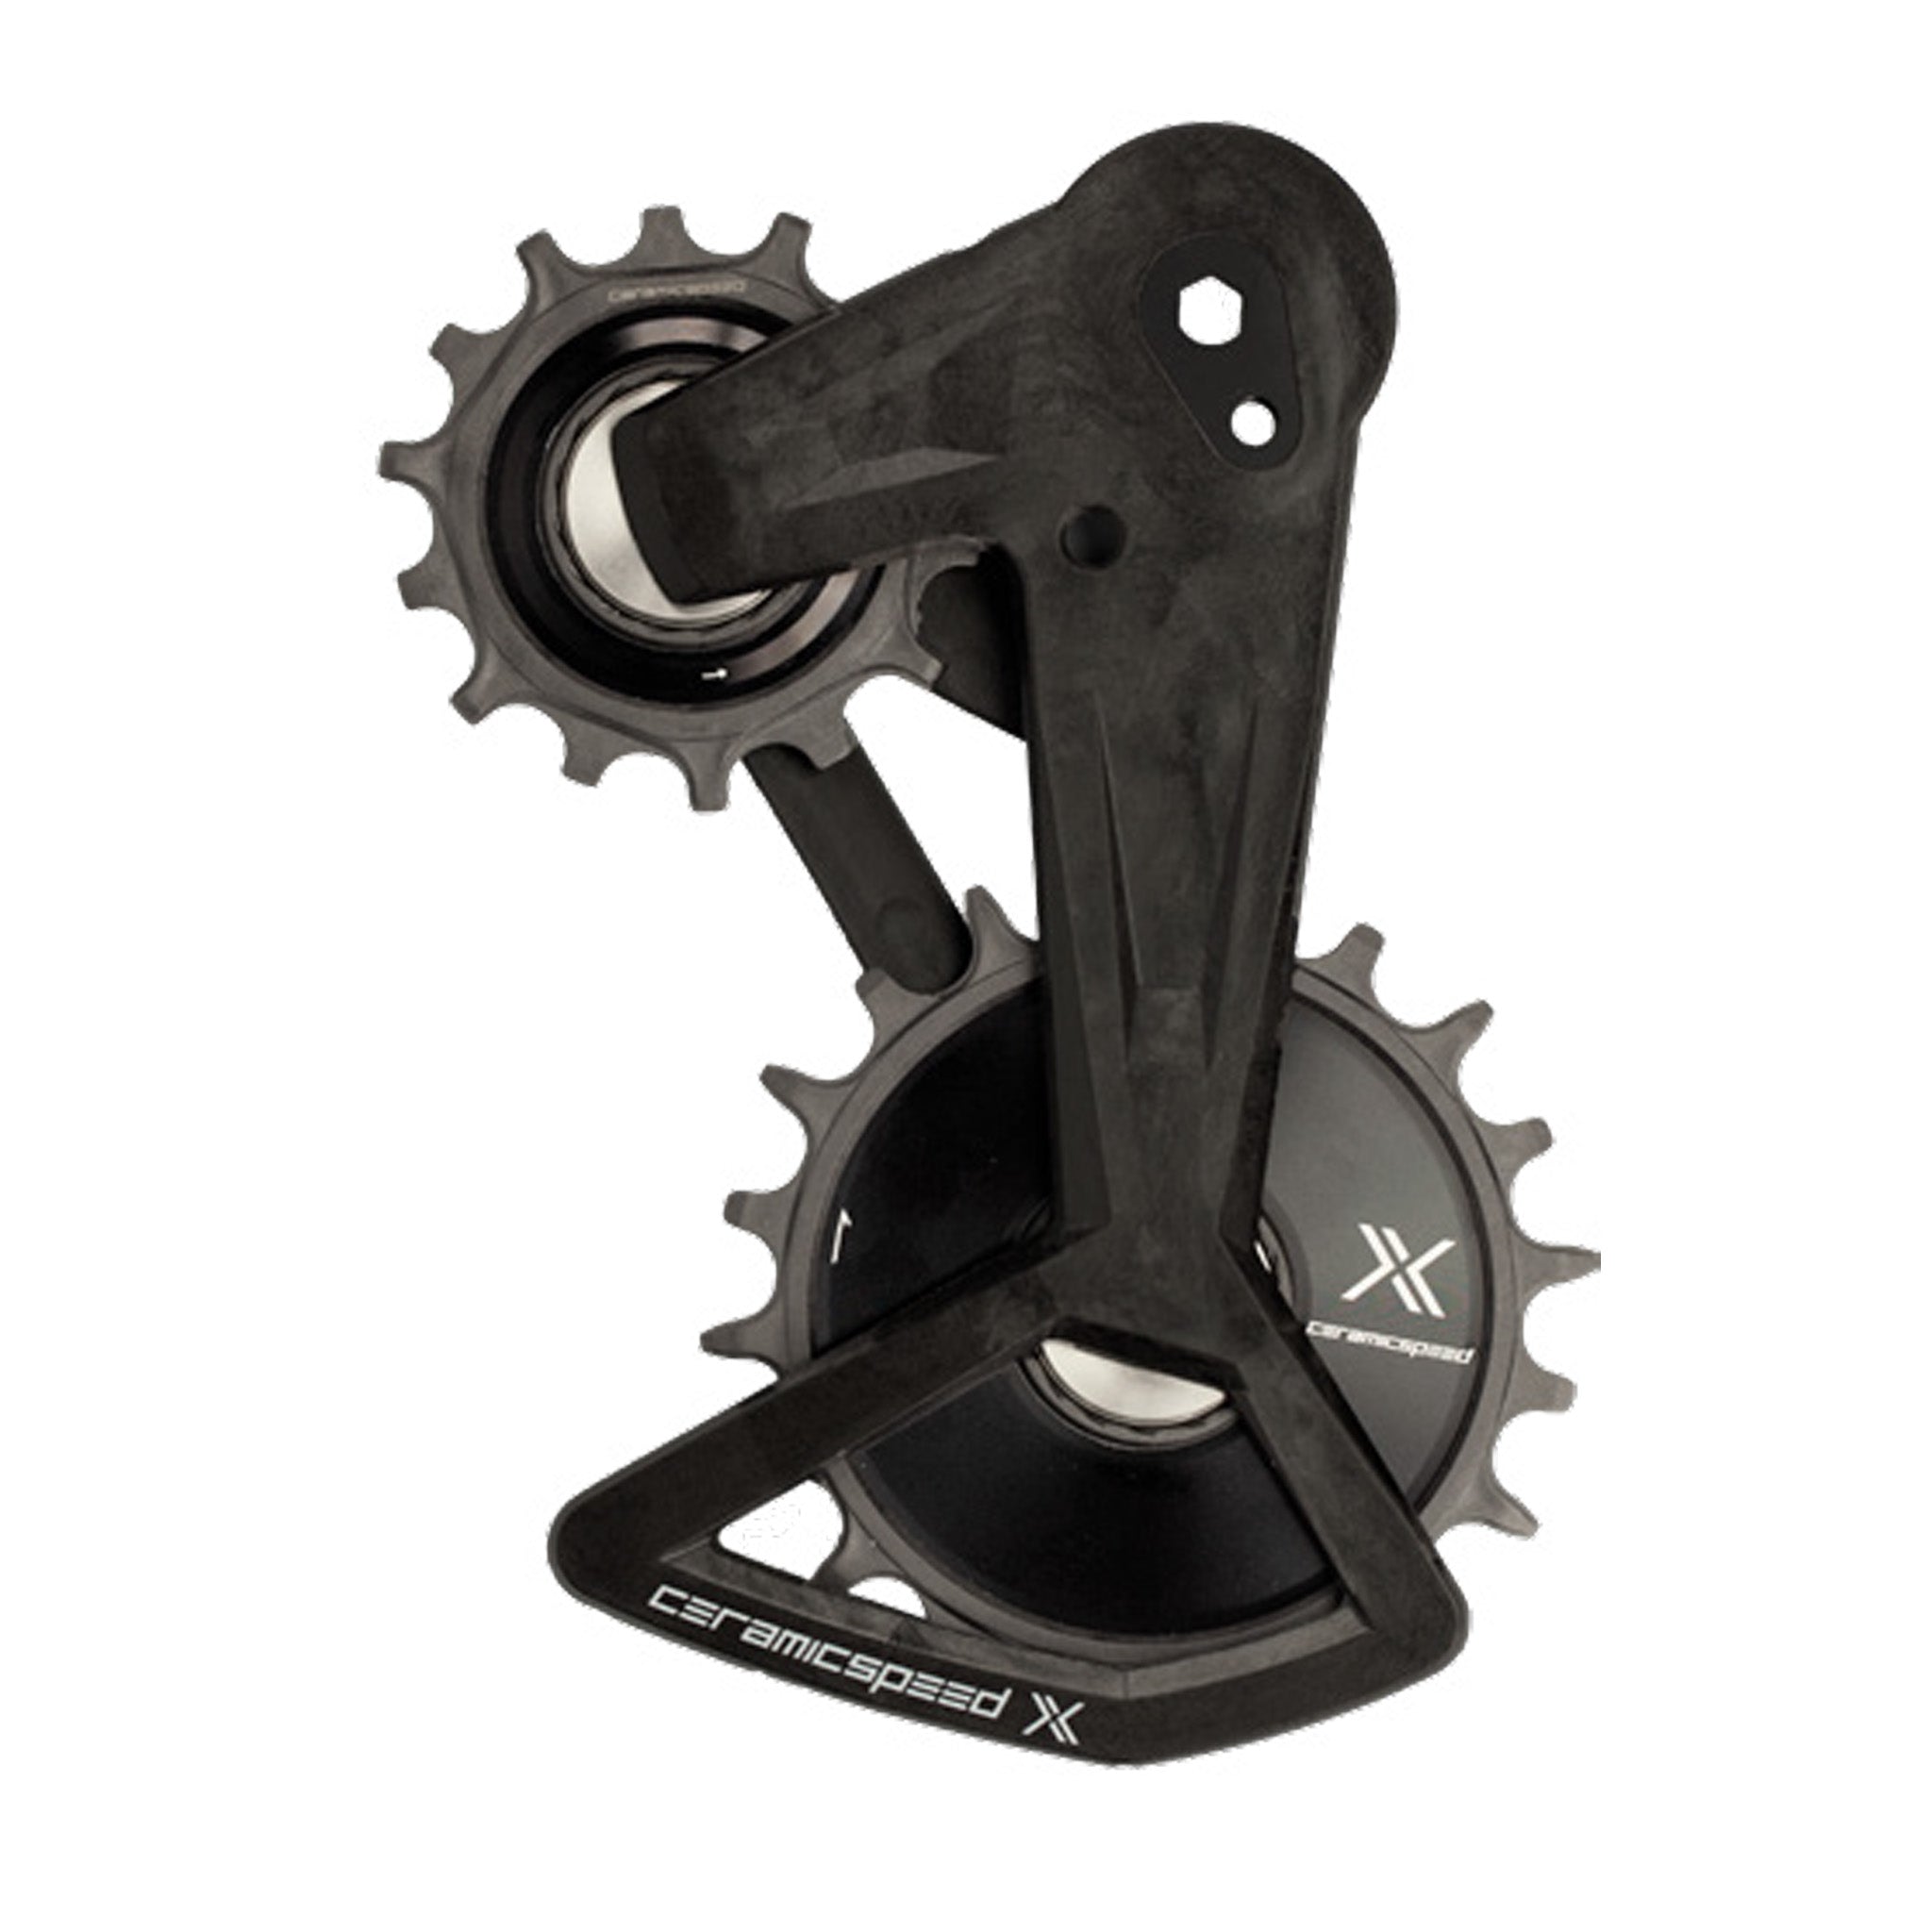 Ceramic Speed OSPW X Pulley Wheel System - For SRAM Eagle T-Type AXS Rear Derailleur BLK Cage BLK Pulley Wheels